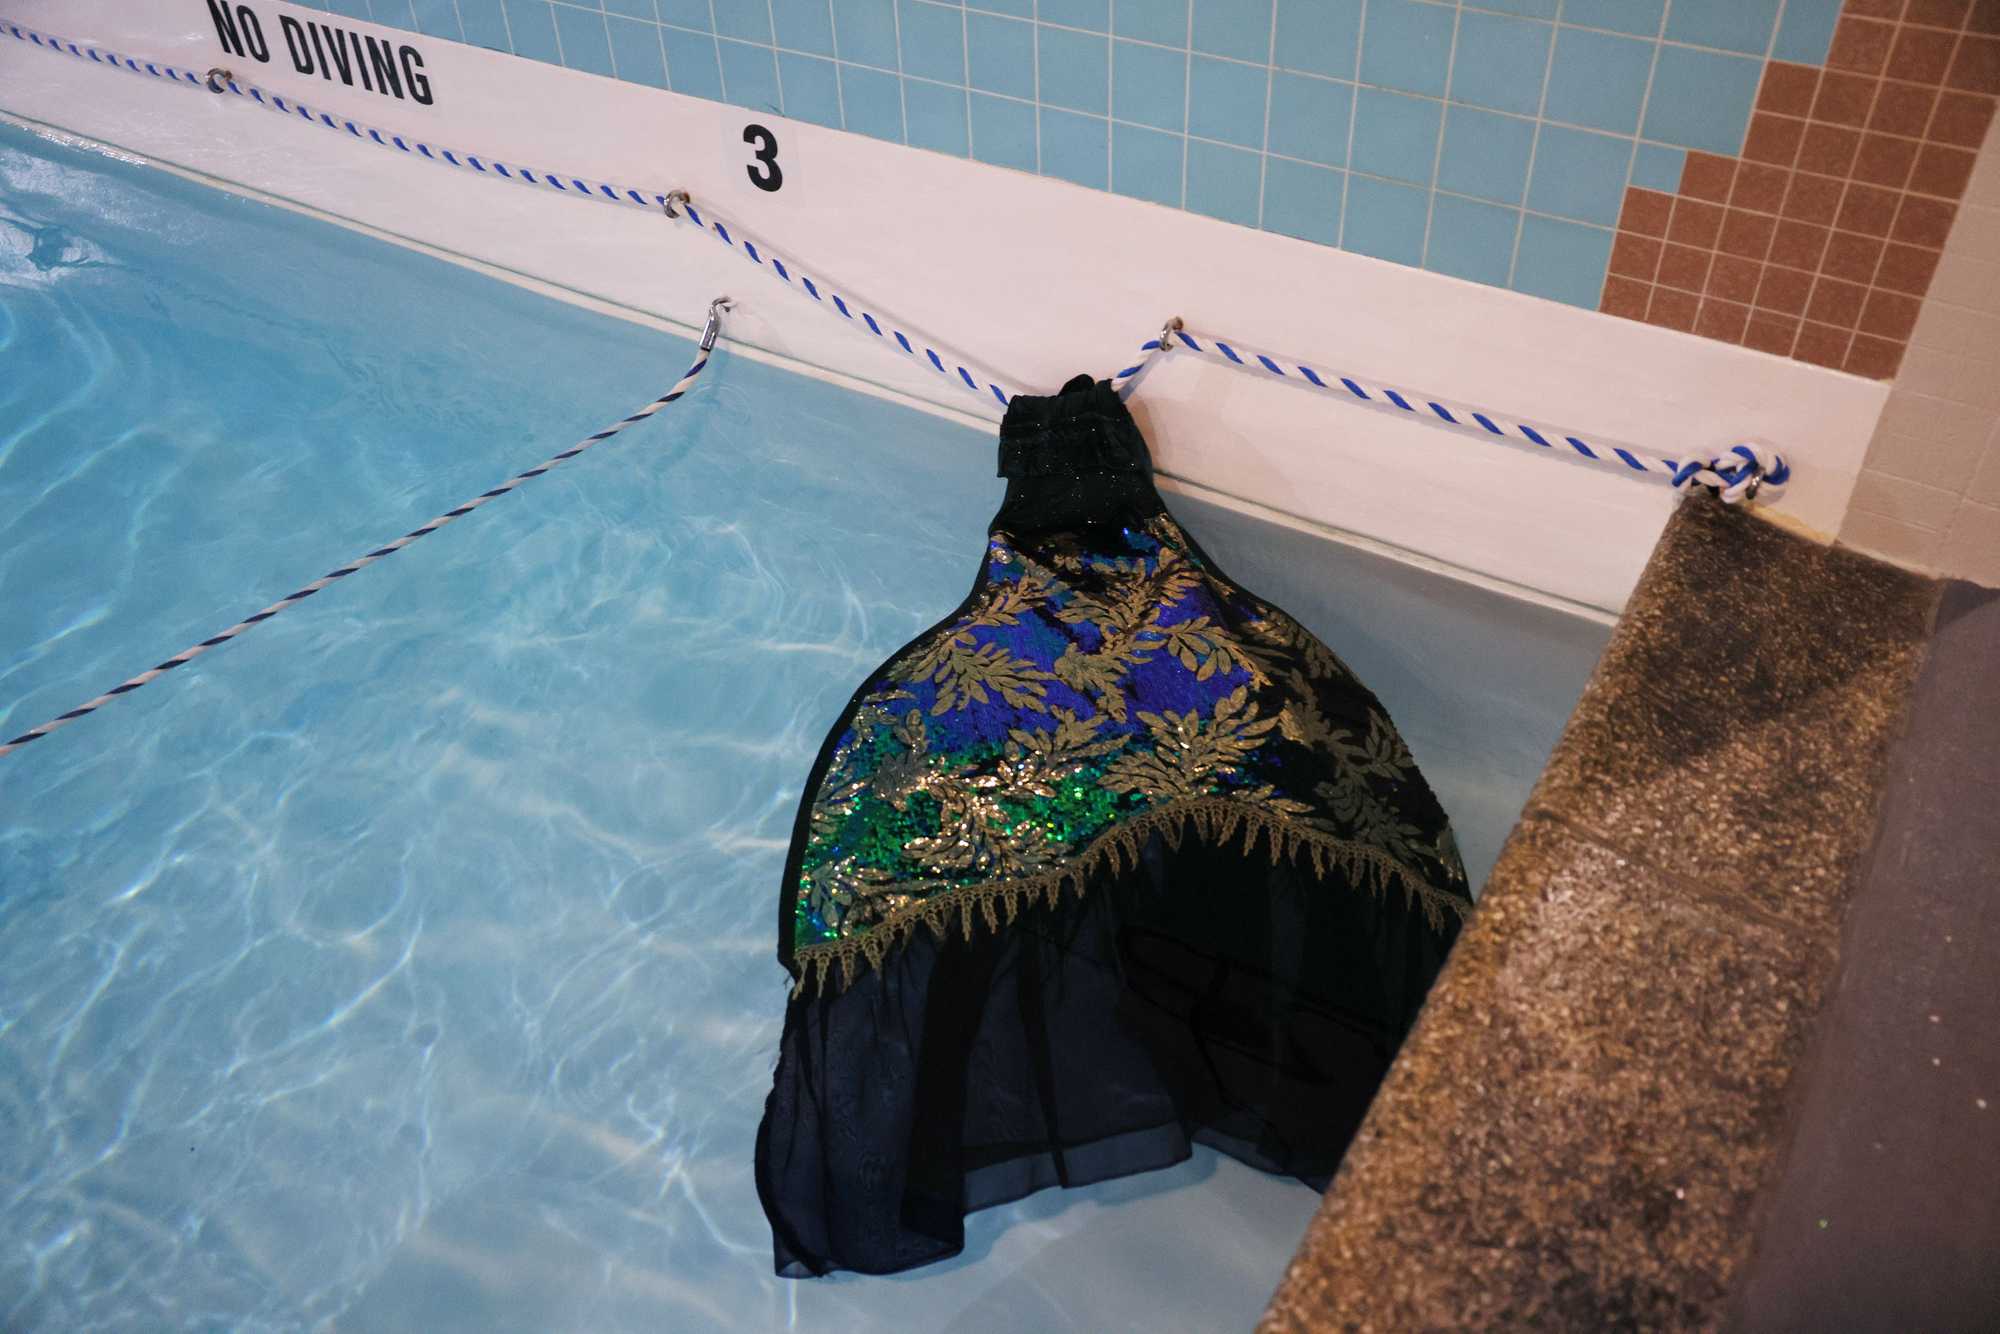 During one of her 15-minute breaks, Mermaid Marvel left her tail in the pool so it would stay warm. The tails weigh upward of 10 pounds when they are wet. 